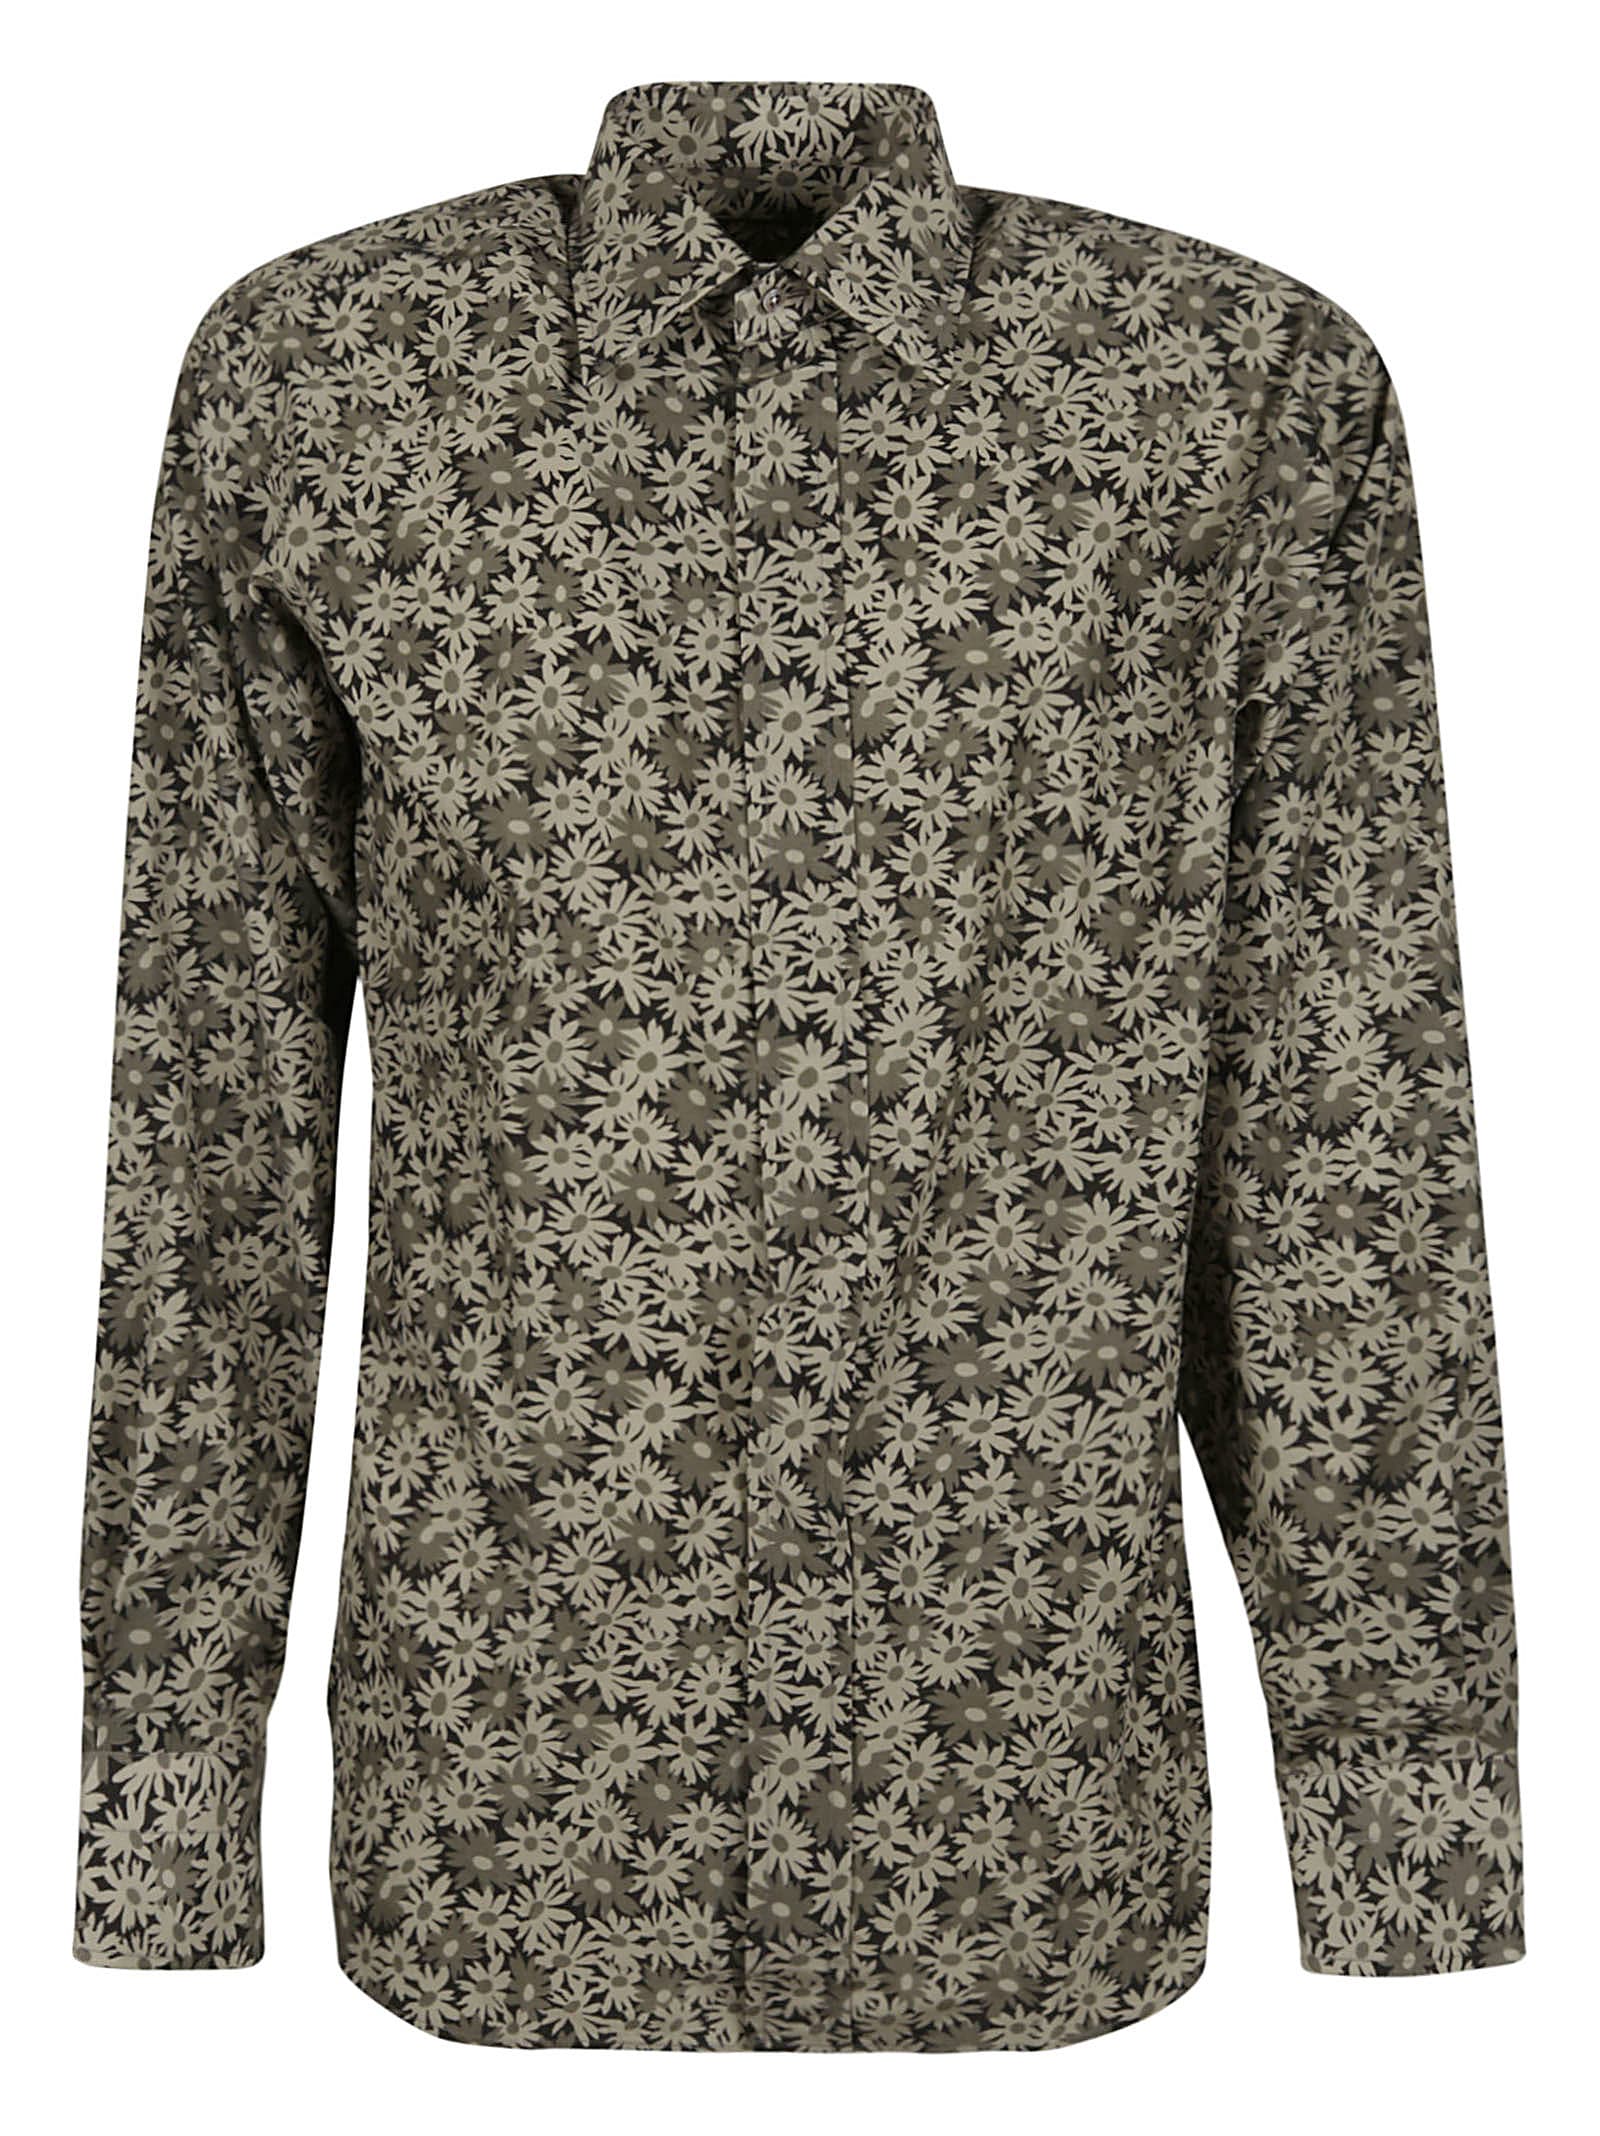 Tom Ford All-over Floral Print Shirt